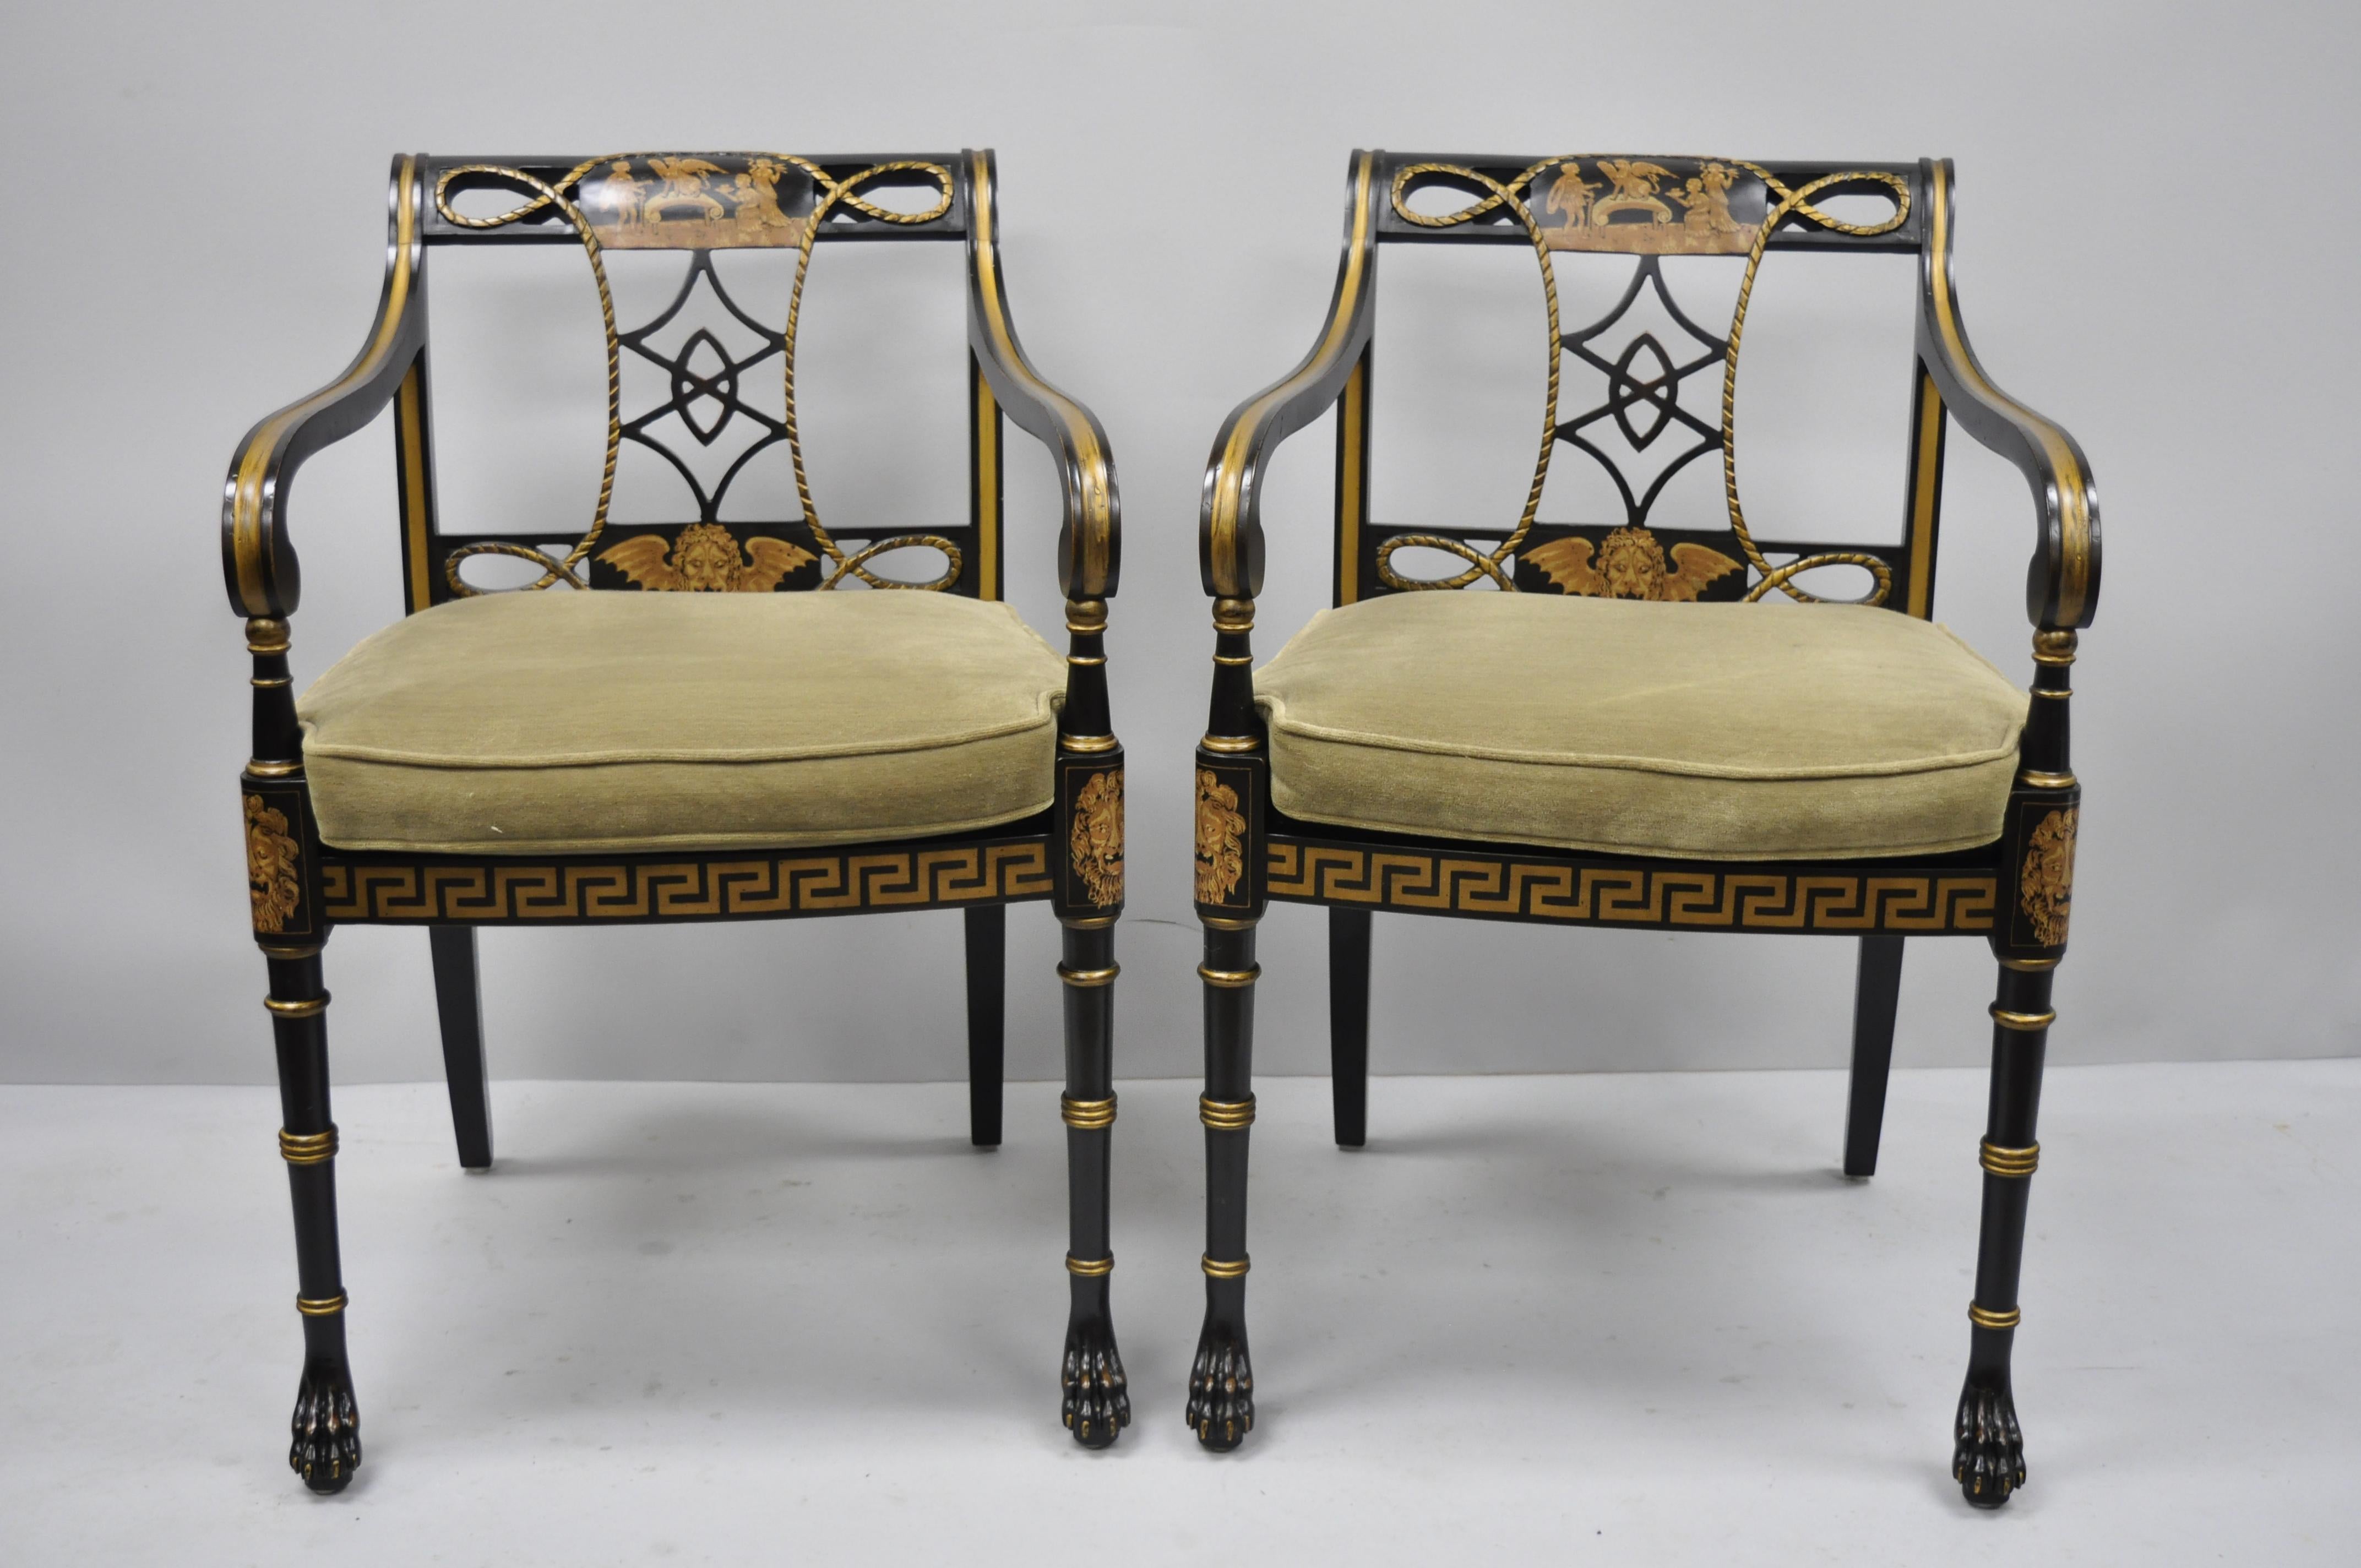 20th century black and gold English Regency style Greek key paw foot armchairs. Items feature cane seat, loose cushion, figural paint decorated backrest, Greek key paint decorated lower rails, solid wood construction, distressed finish, carved paw